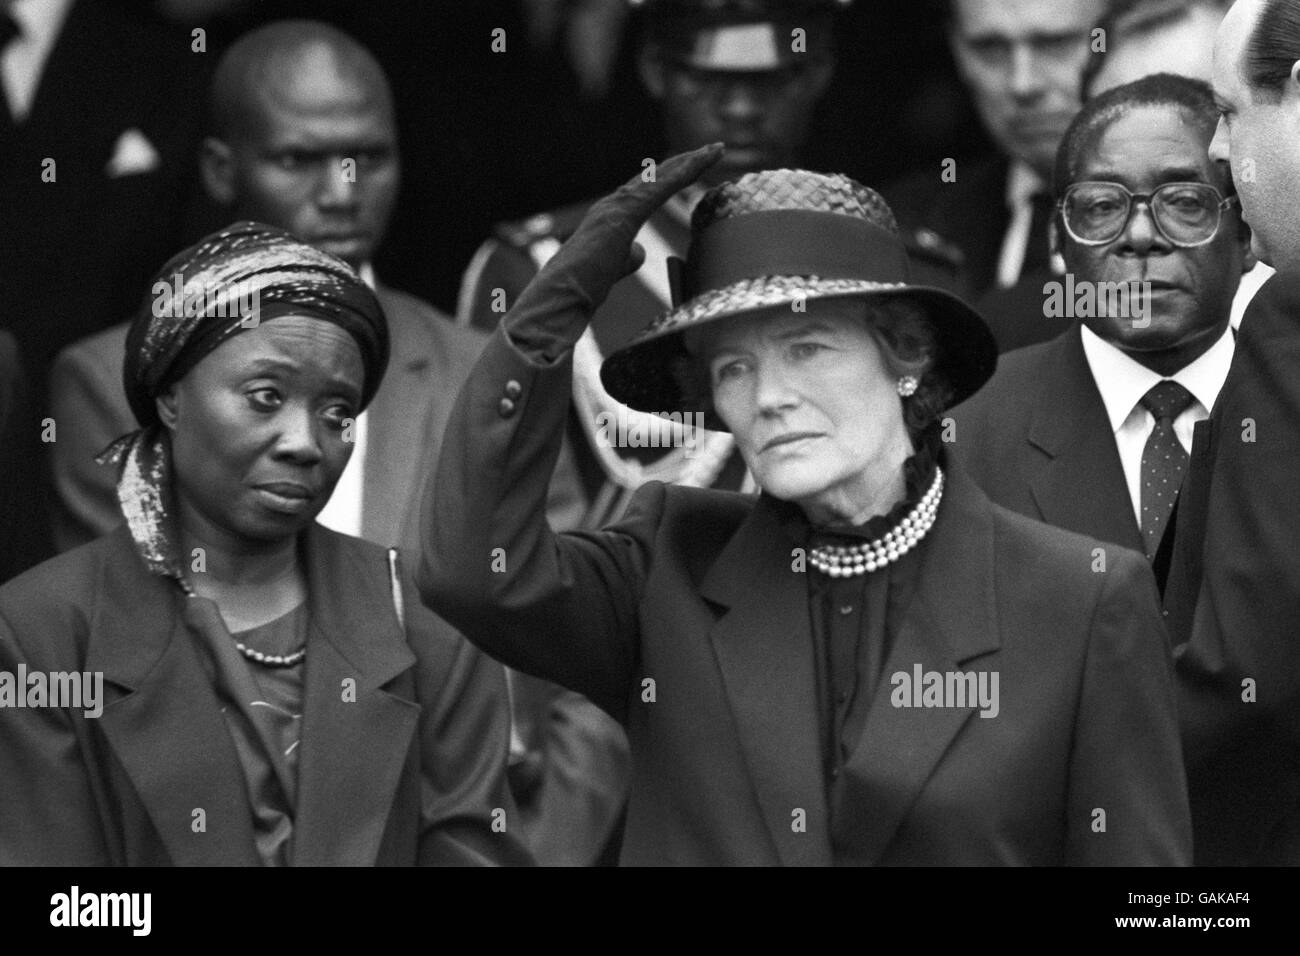 Lady Soames, widow of Lord Soames, at her husbands funeral at All Saints Curch, Odiham with Robert Mugabe (right) and his wife Sally Mugabe. Lord Soames a former governor of Rhodesia, aided Mugabe in the early days of his countries independence. Stock Photo